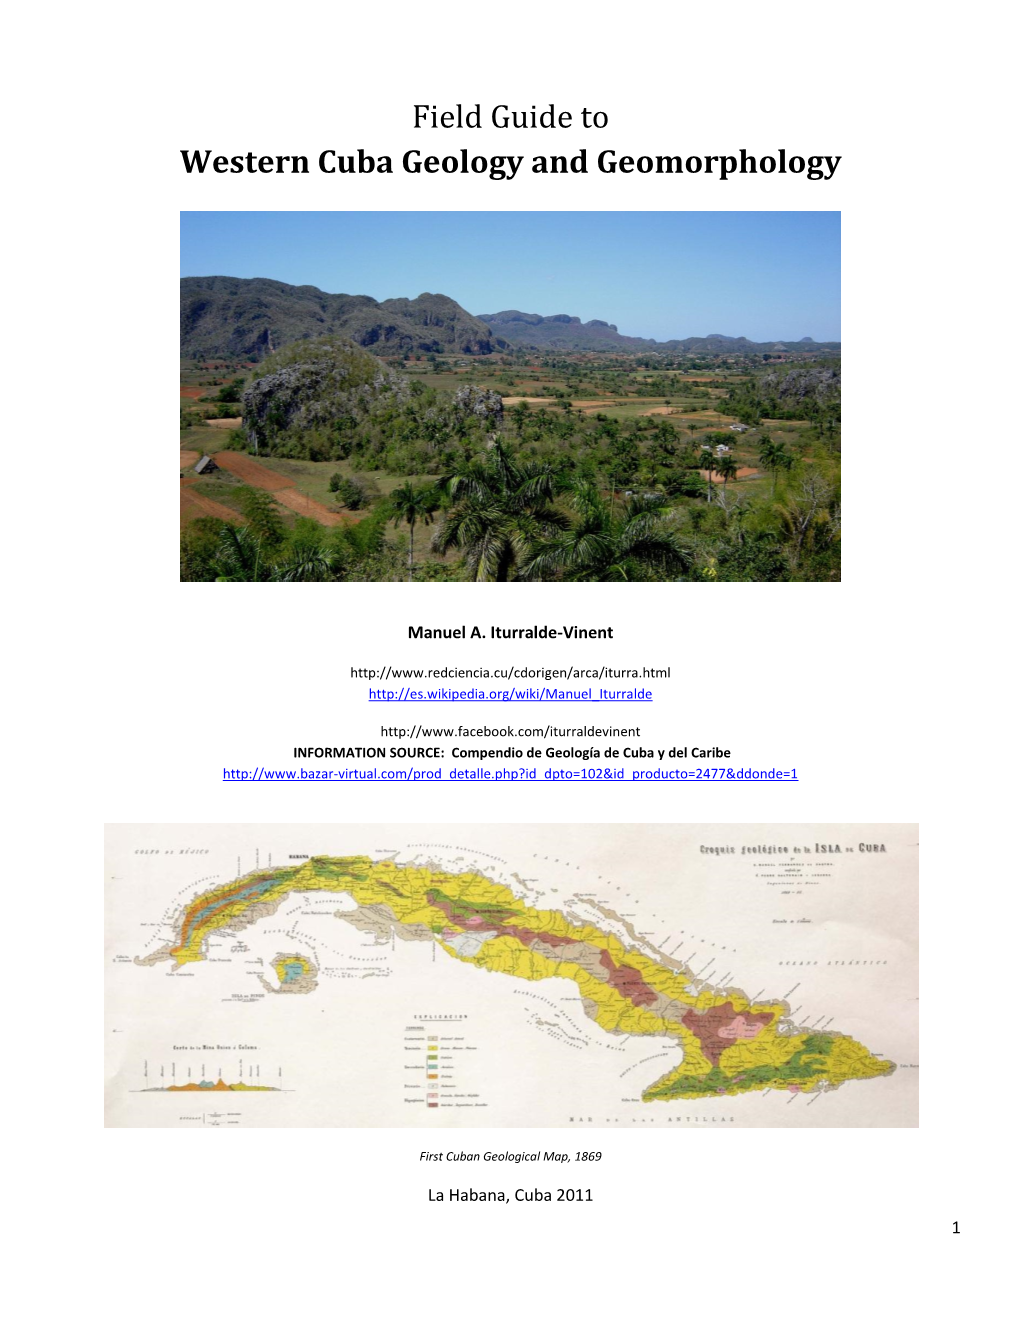 Field Guide to Western Cuba Geology and Geomorphology